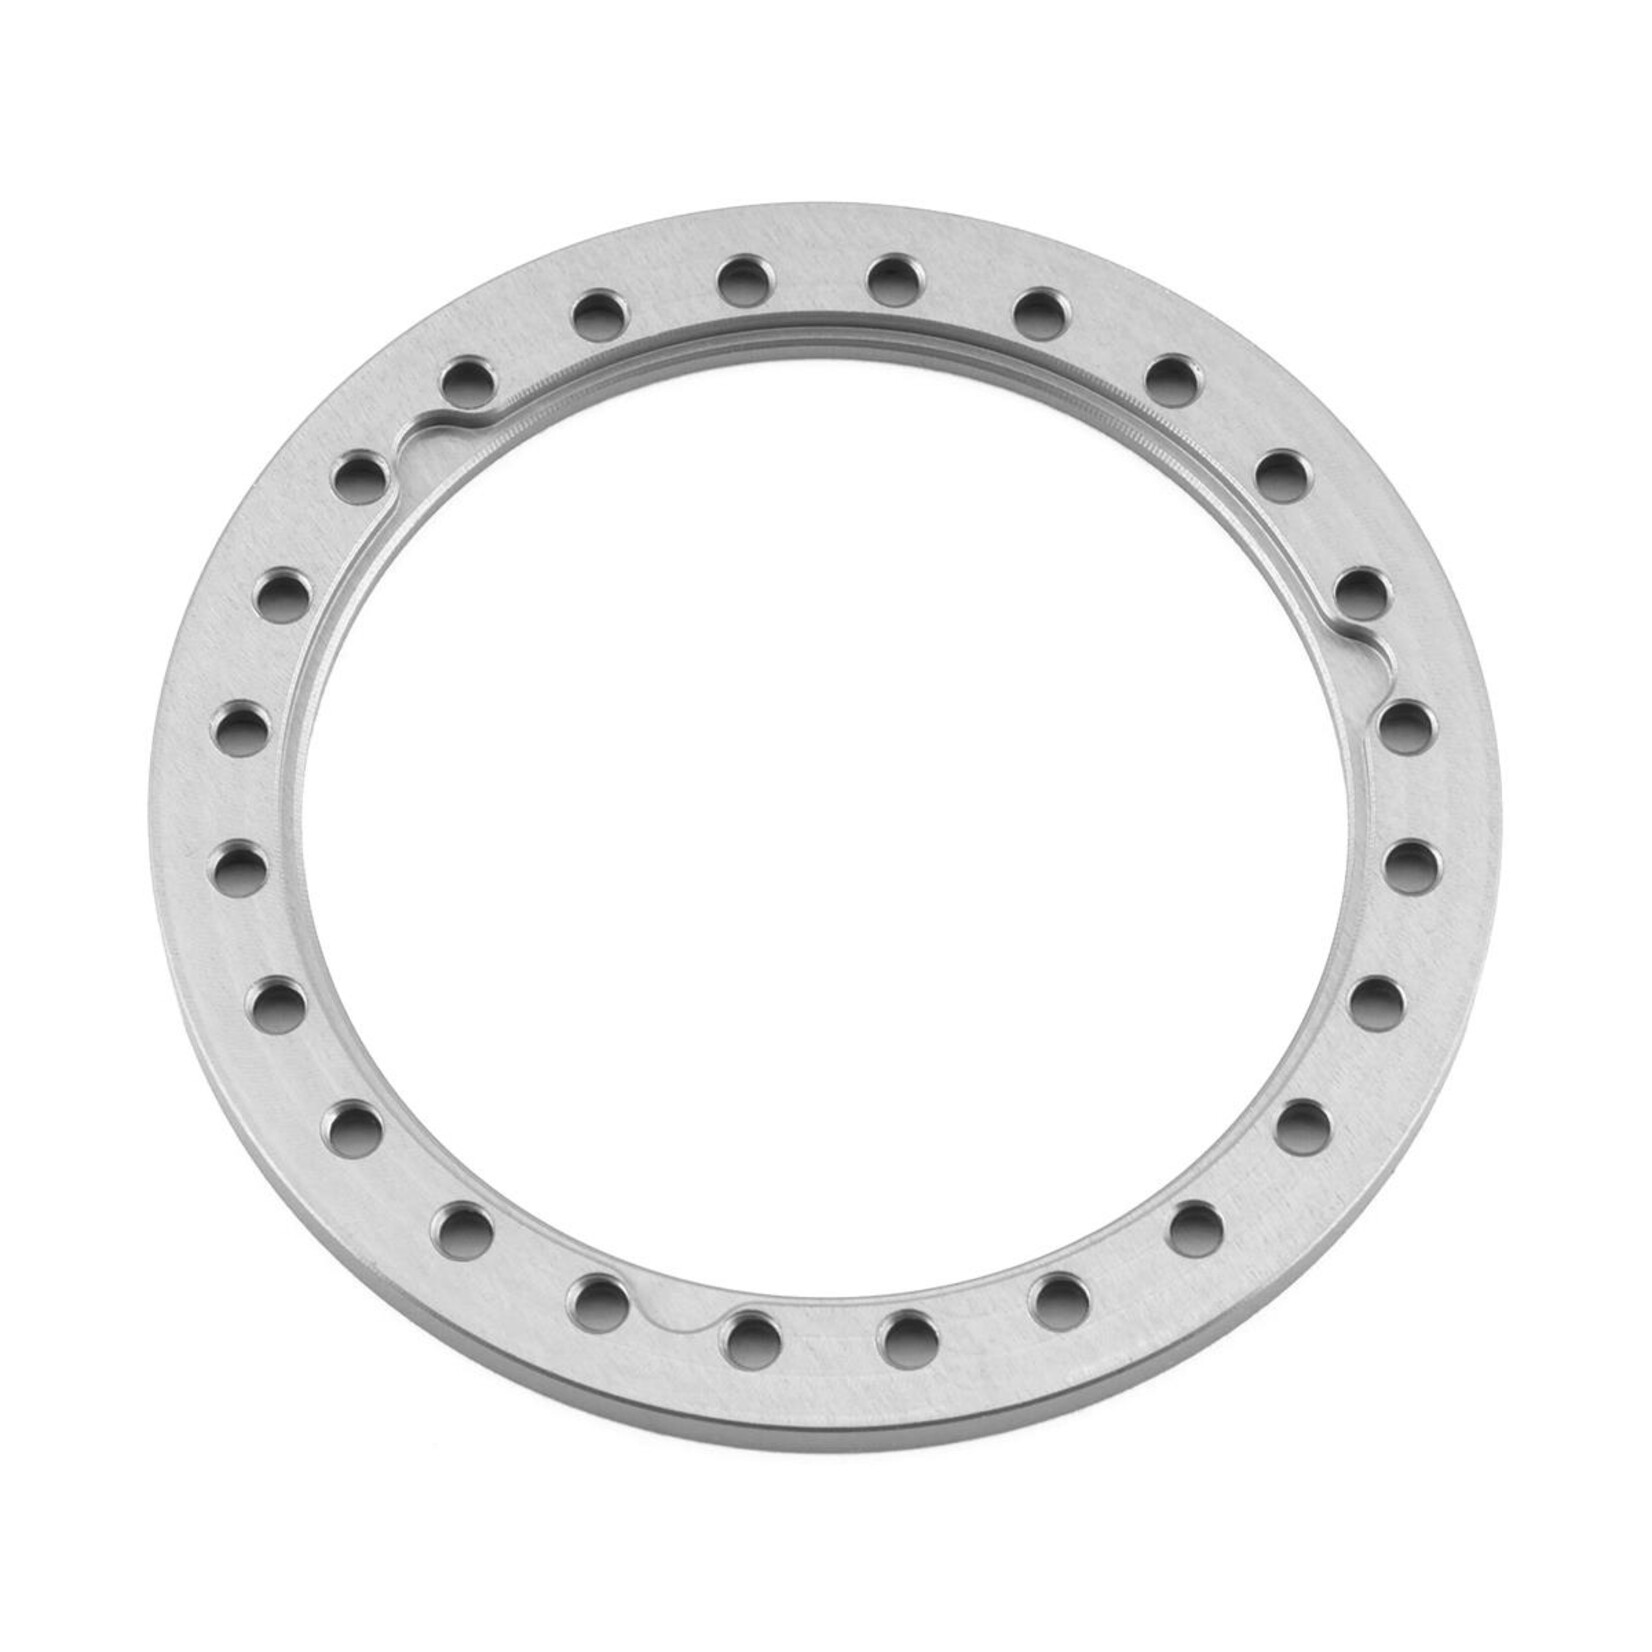 Vanquish Products Vanquish Products 1.9 IFR Original Beadlock Ring (Silver) #VPS05401